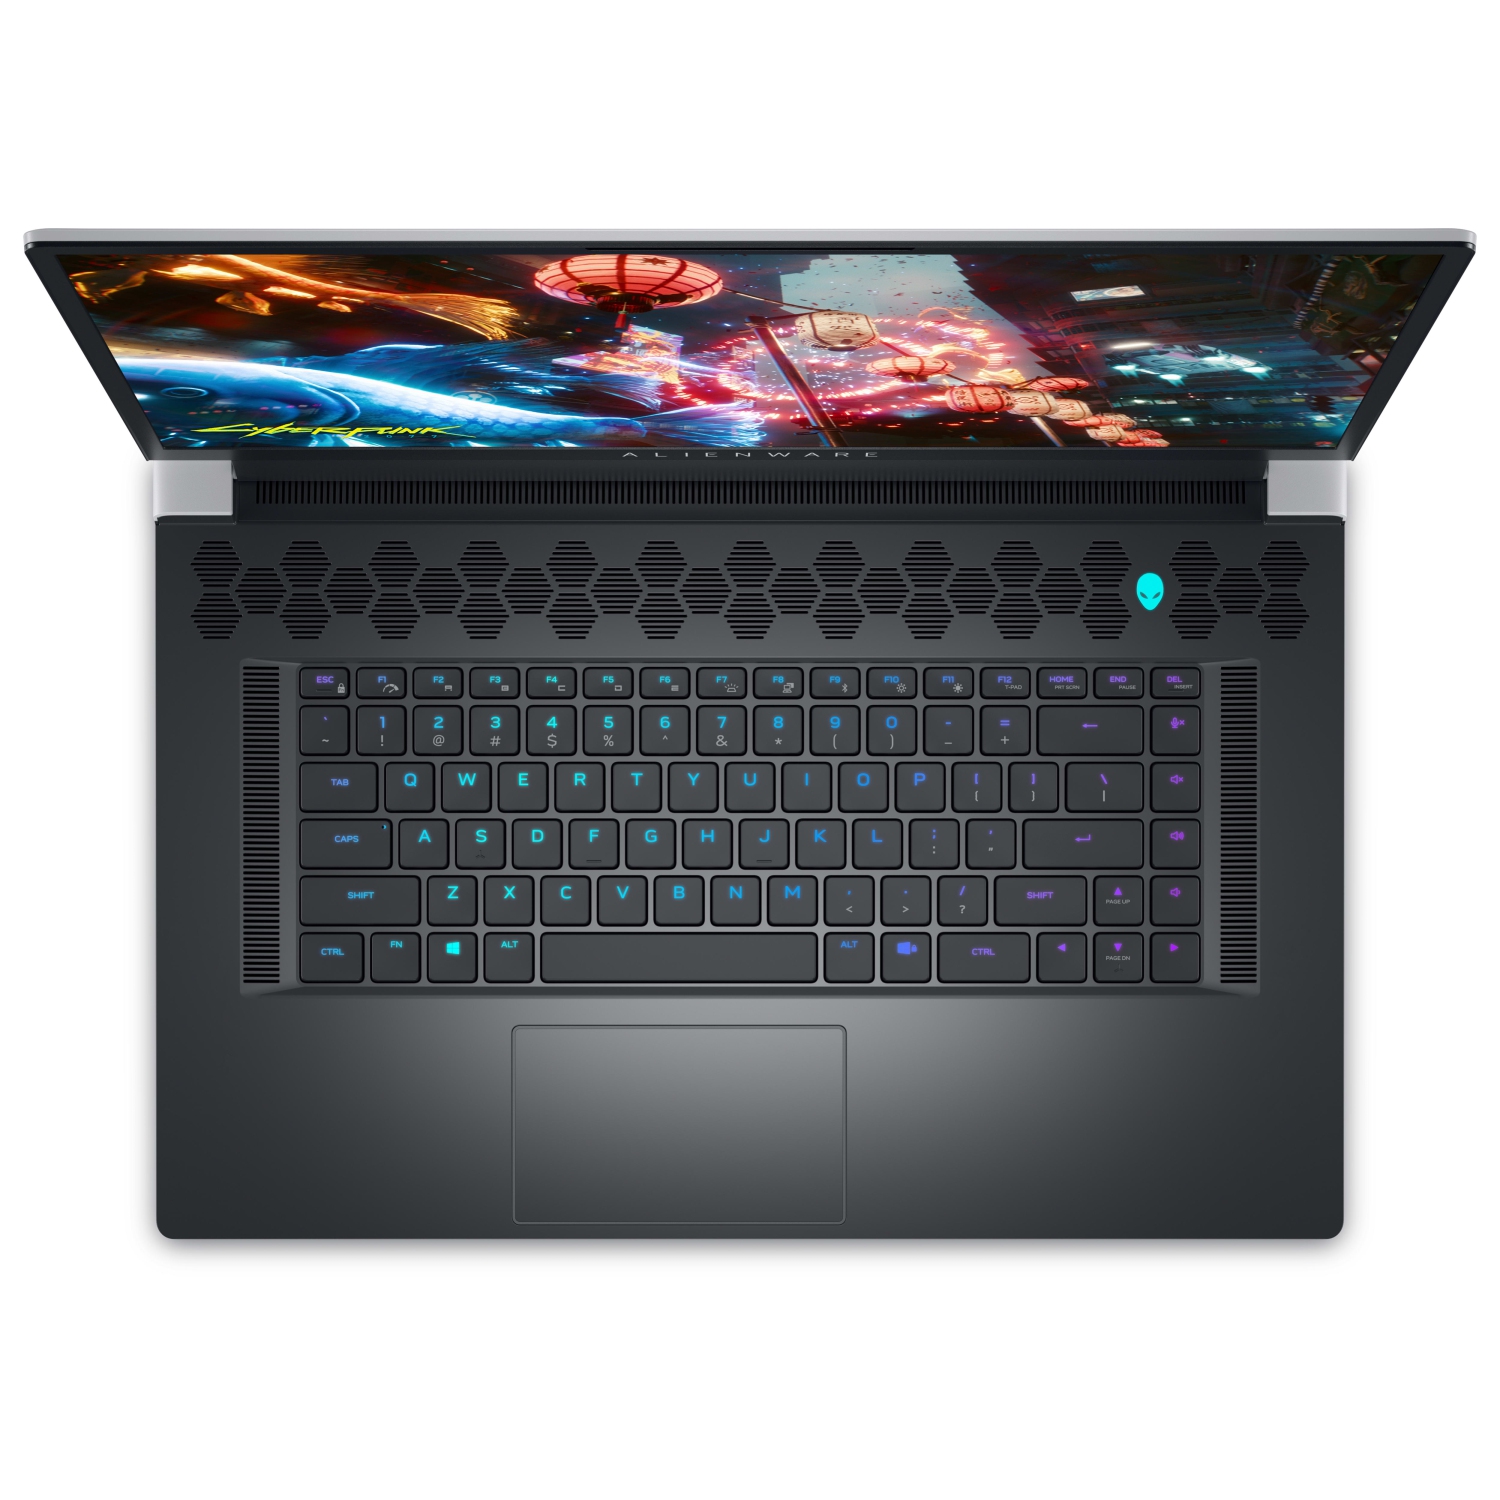 Refurbished (Excellent) – Dell Alienware X17 R2 Gaming Laptop (2022) | 17.3" FHD | Core i9 - 2TB SSD - 32GB RAM - RTX 3080 | 14 Cores @ 5 GHz - 12th Gen CPU - 8GB GDDR6X